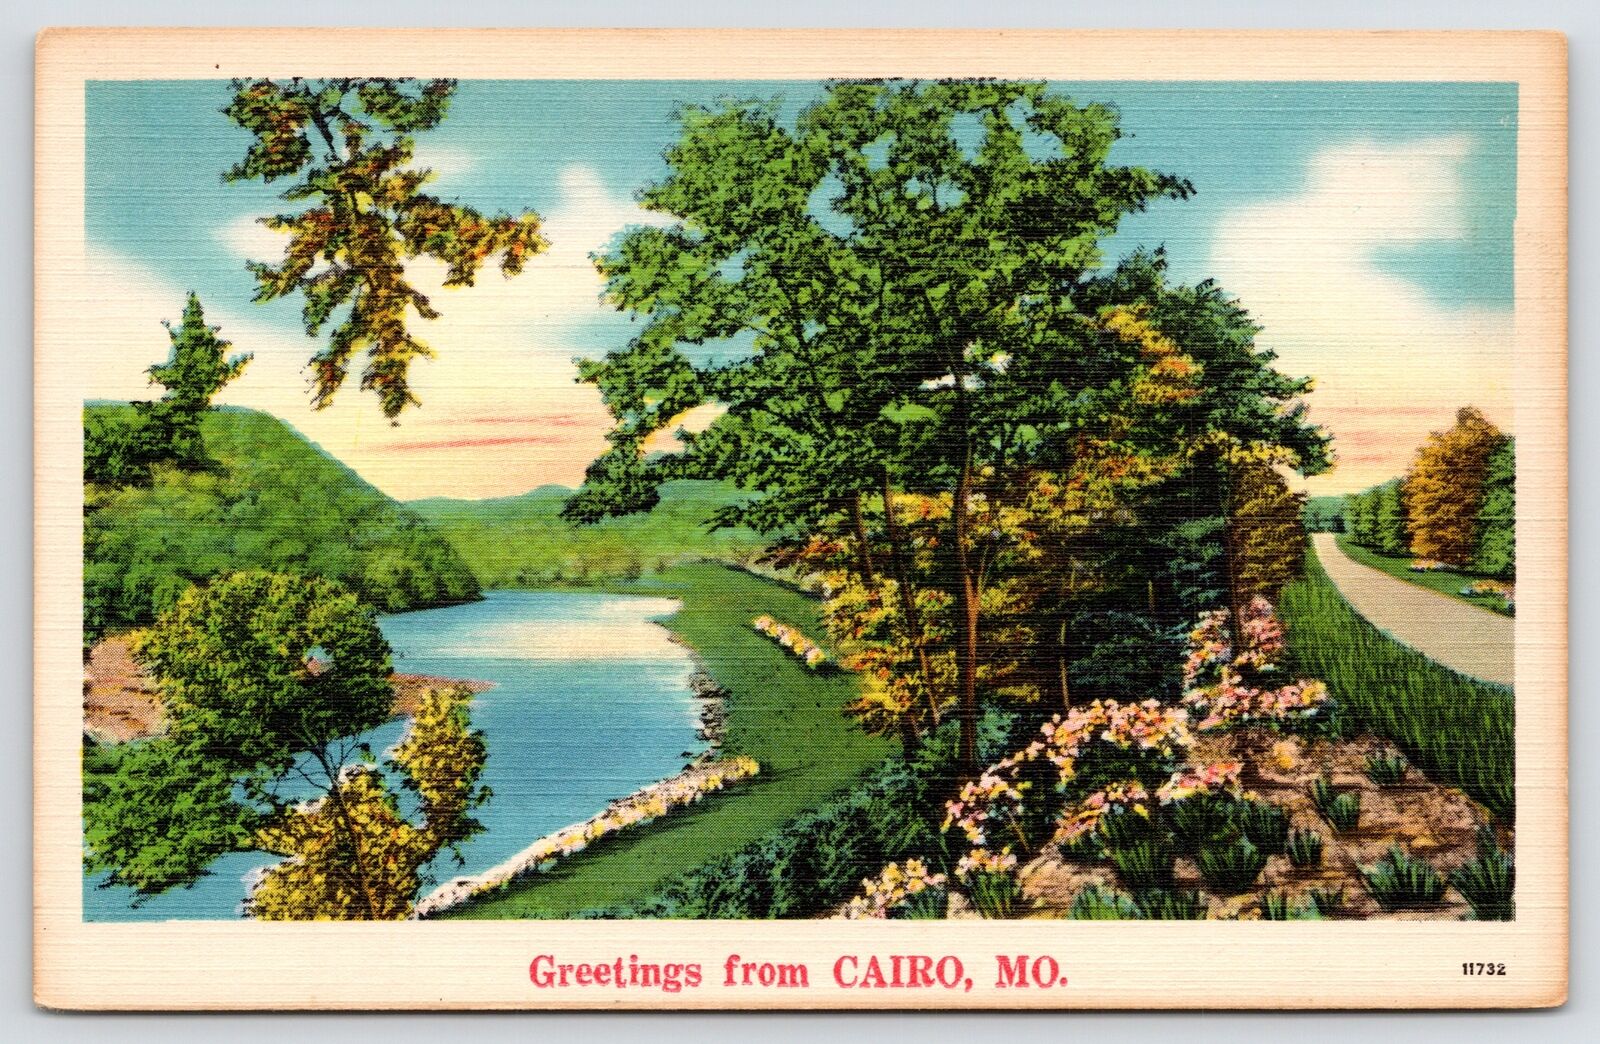 Cairo Missouri~Greetings~Road by River Scene in Early Autumn~1930s Postcard